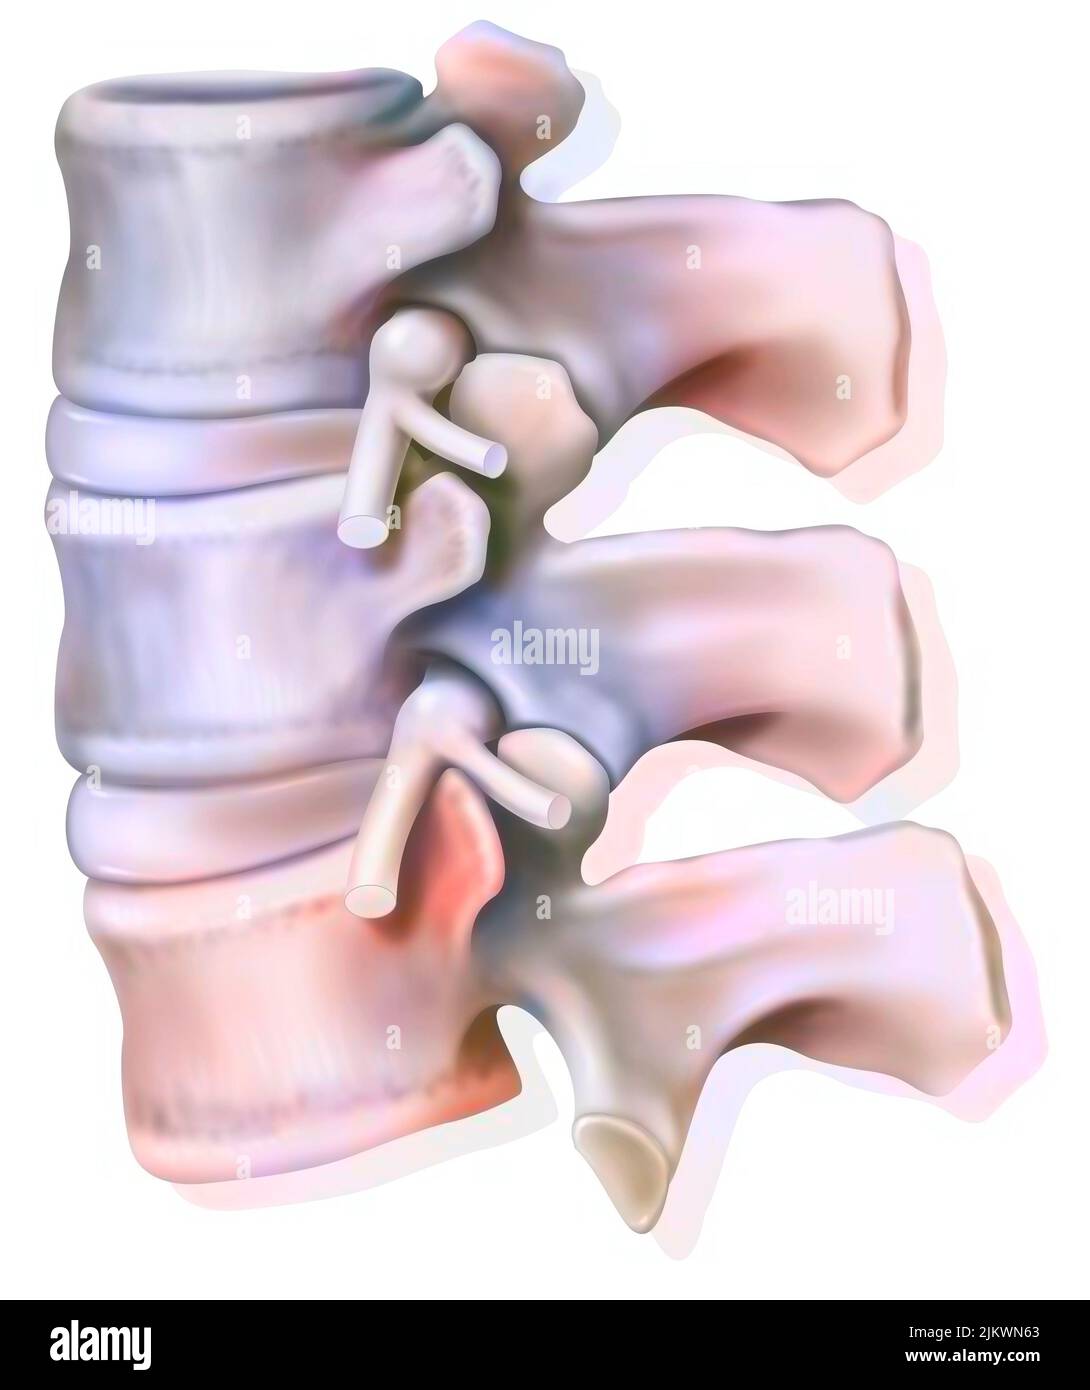 Lumbar nerve roots of the spinal nerves coming out of the lumbar vertebrae. Stock Photo